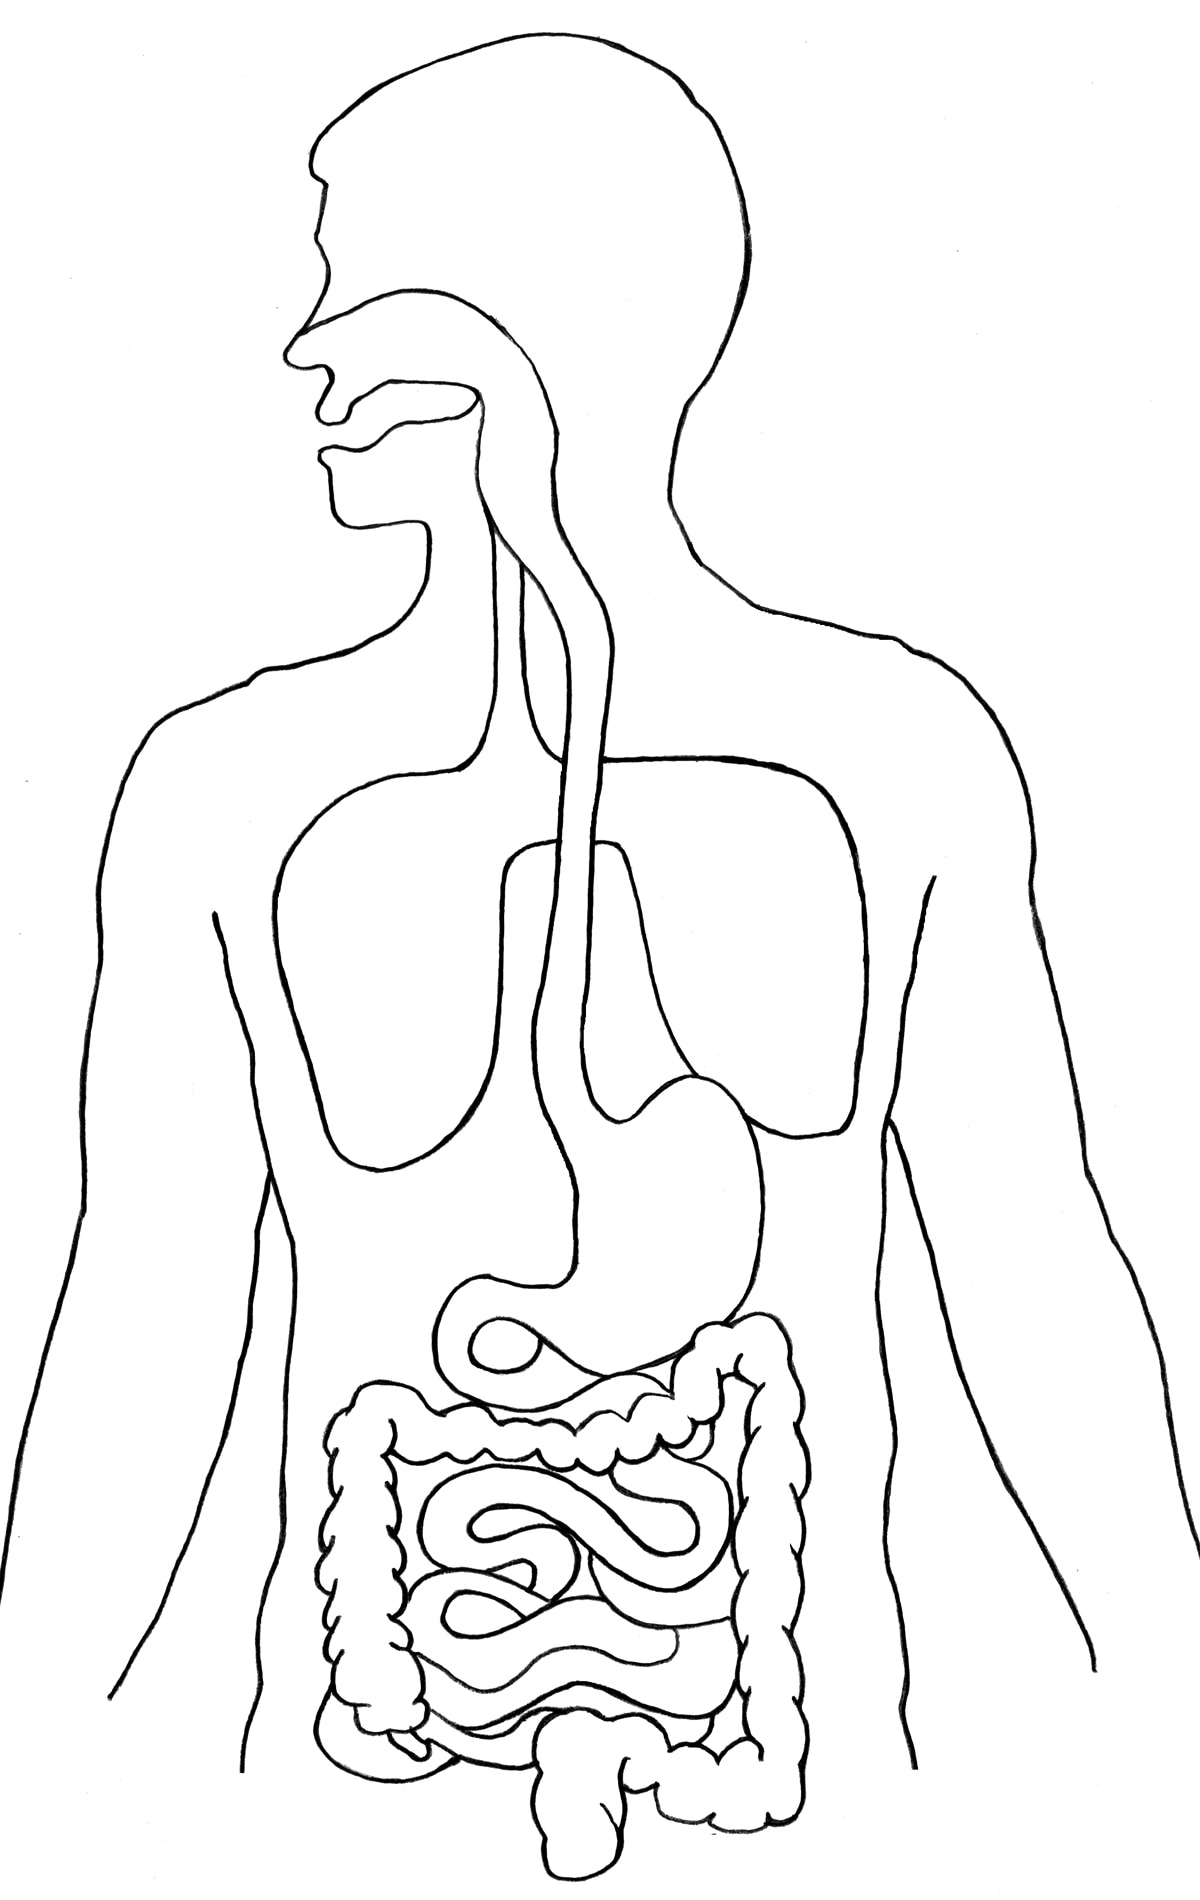 HUMAN DIGESTIVE SYSTEM # Images • Ajay (@ajay48945) on ShareChat